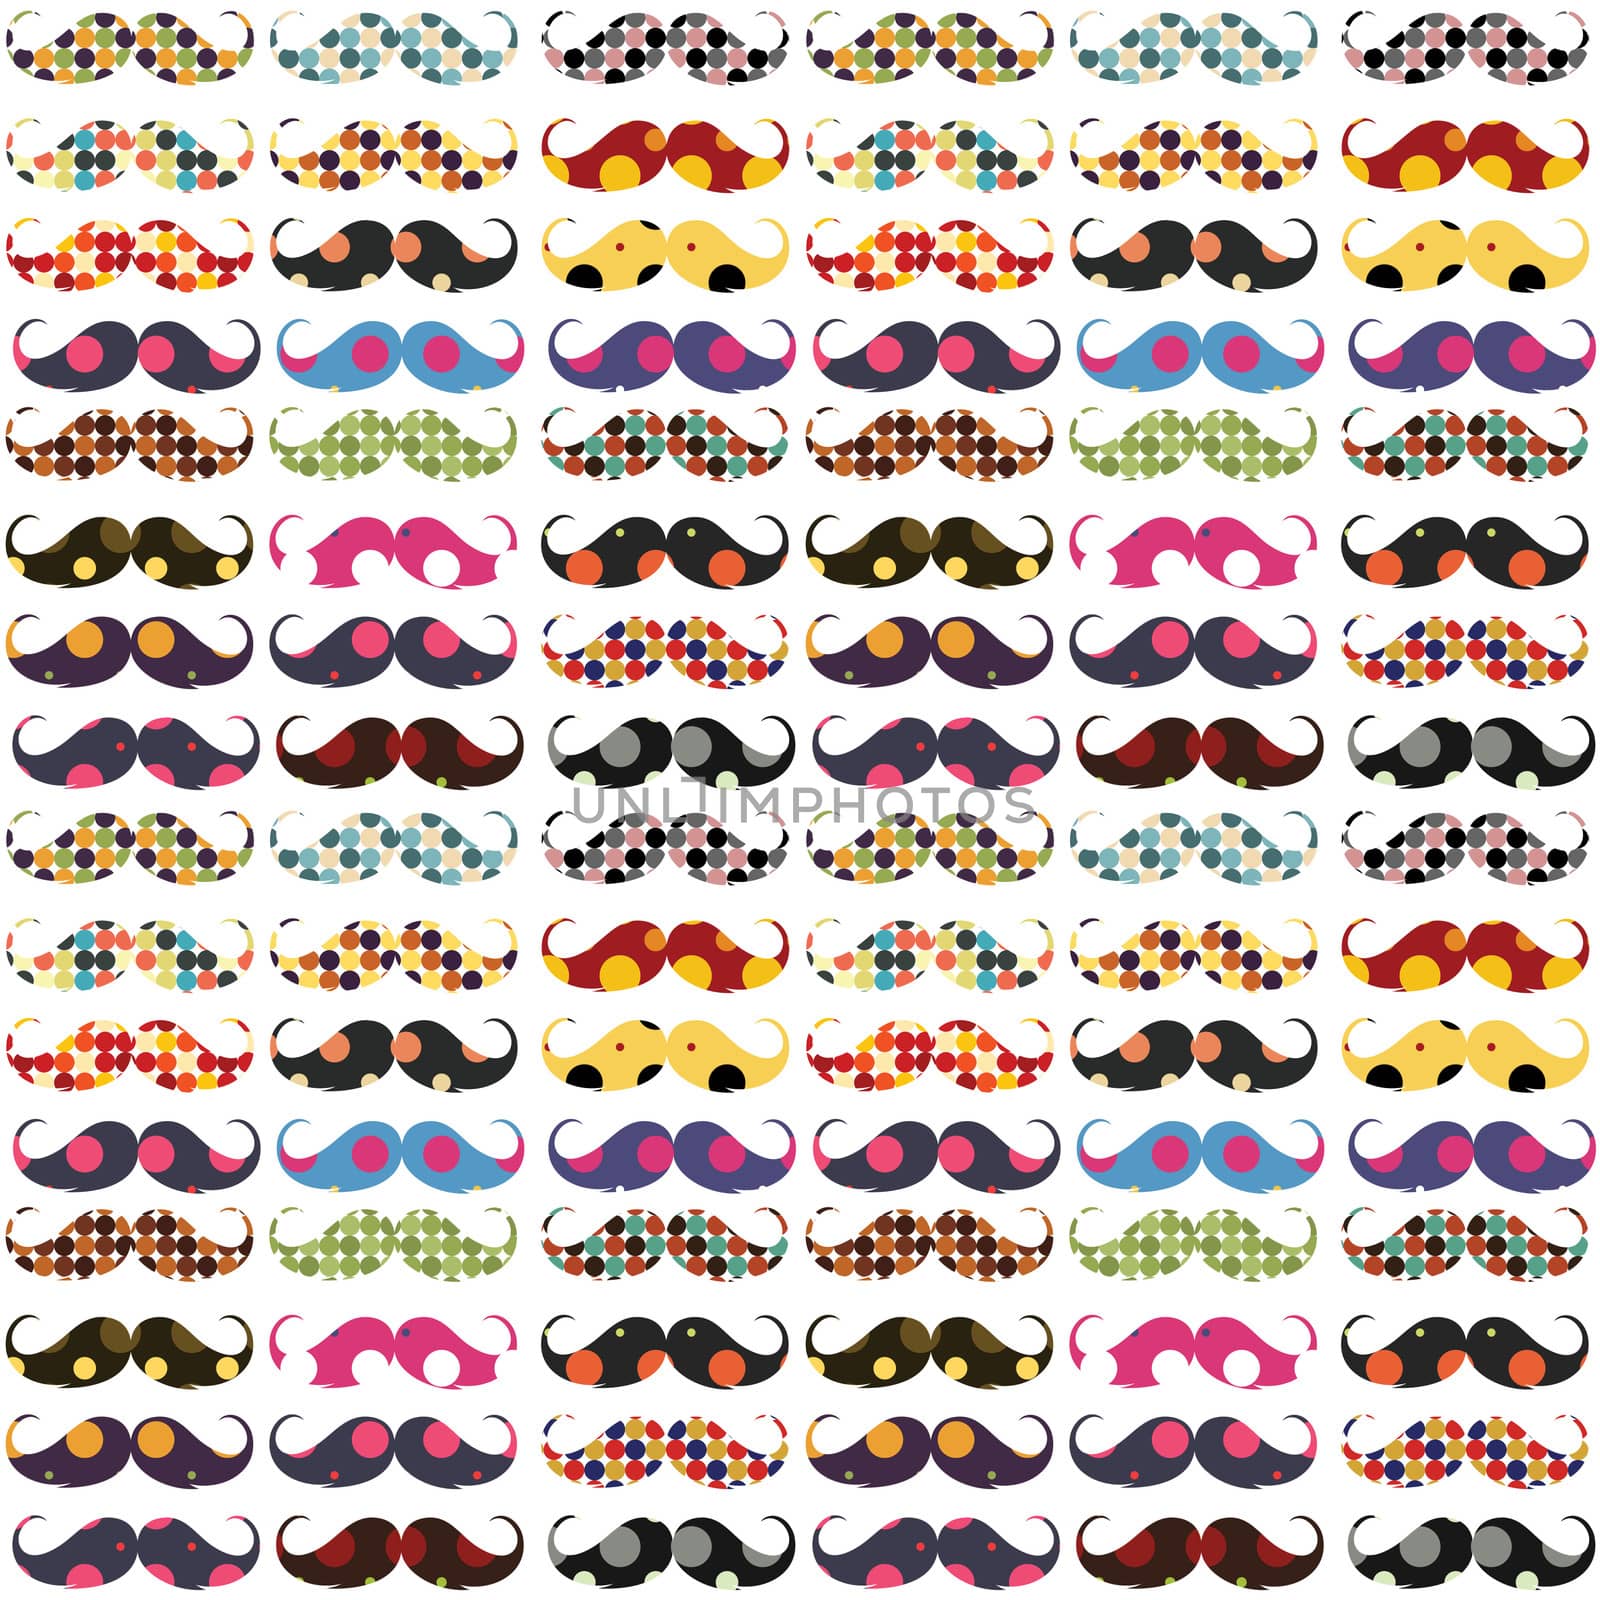 Mustache pattern with polka dots by nadil